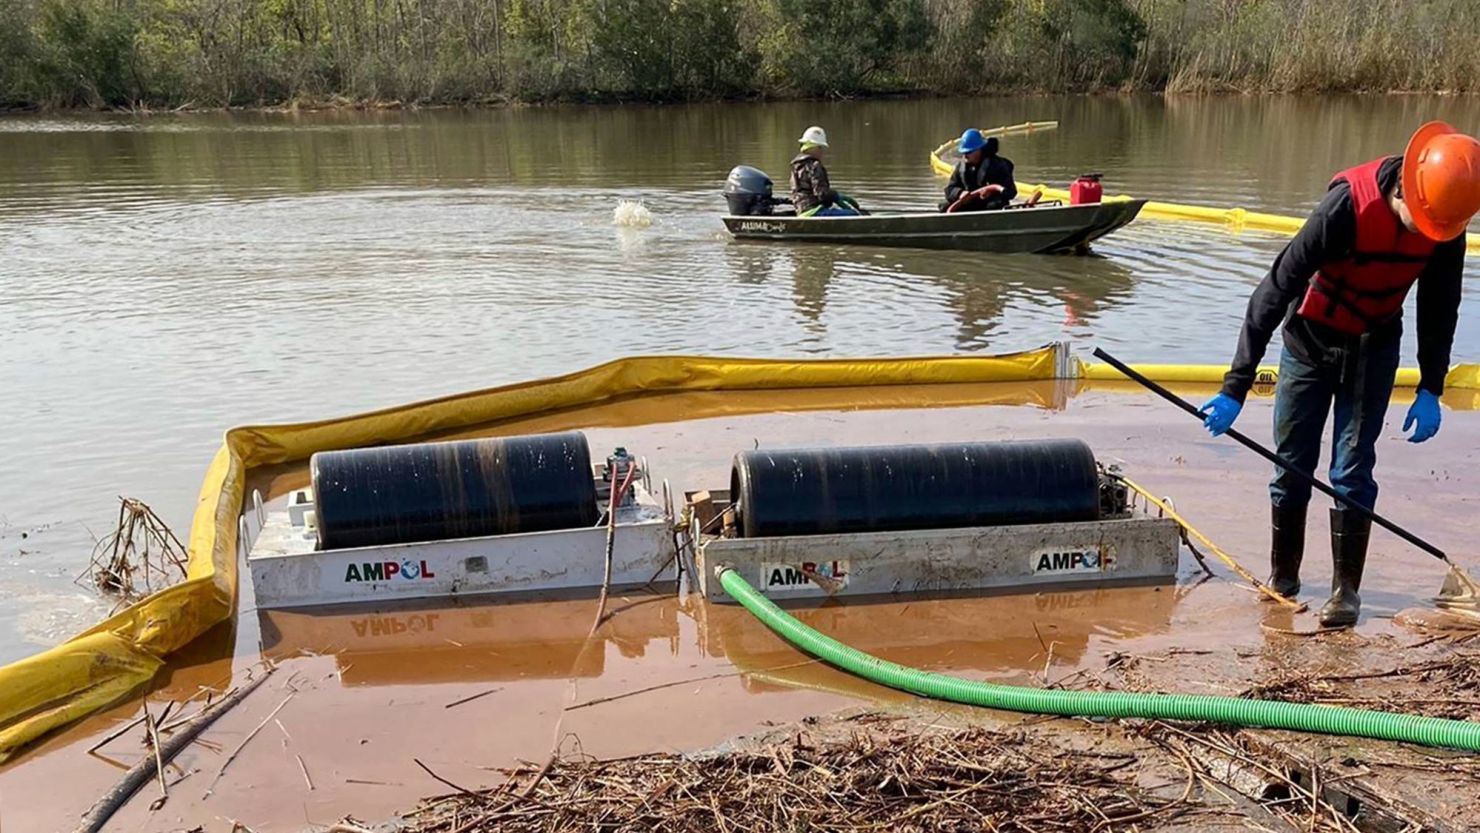 Cleanup work is seen at the site where more than 300,000 gallons of diesel spilled on December 27, 2021, just outside New Orleans.